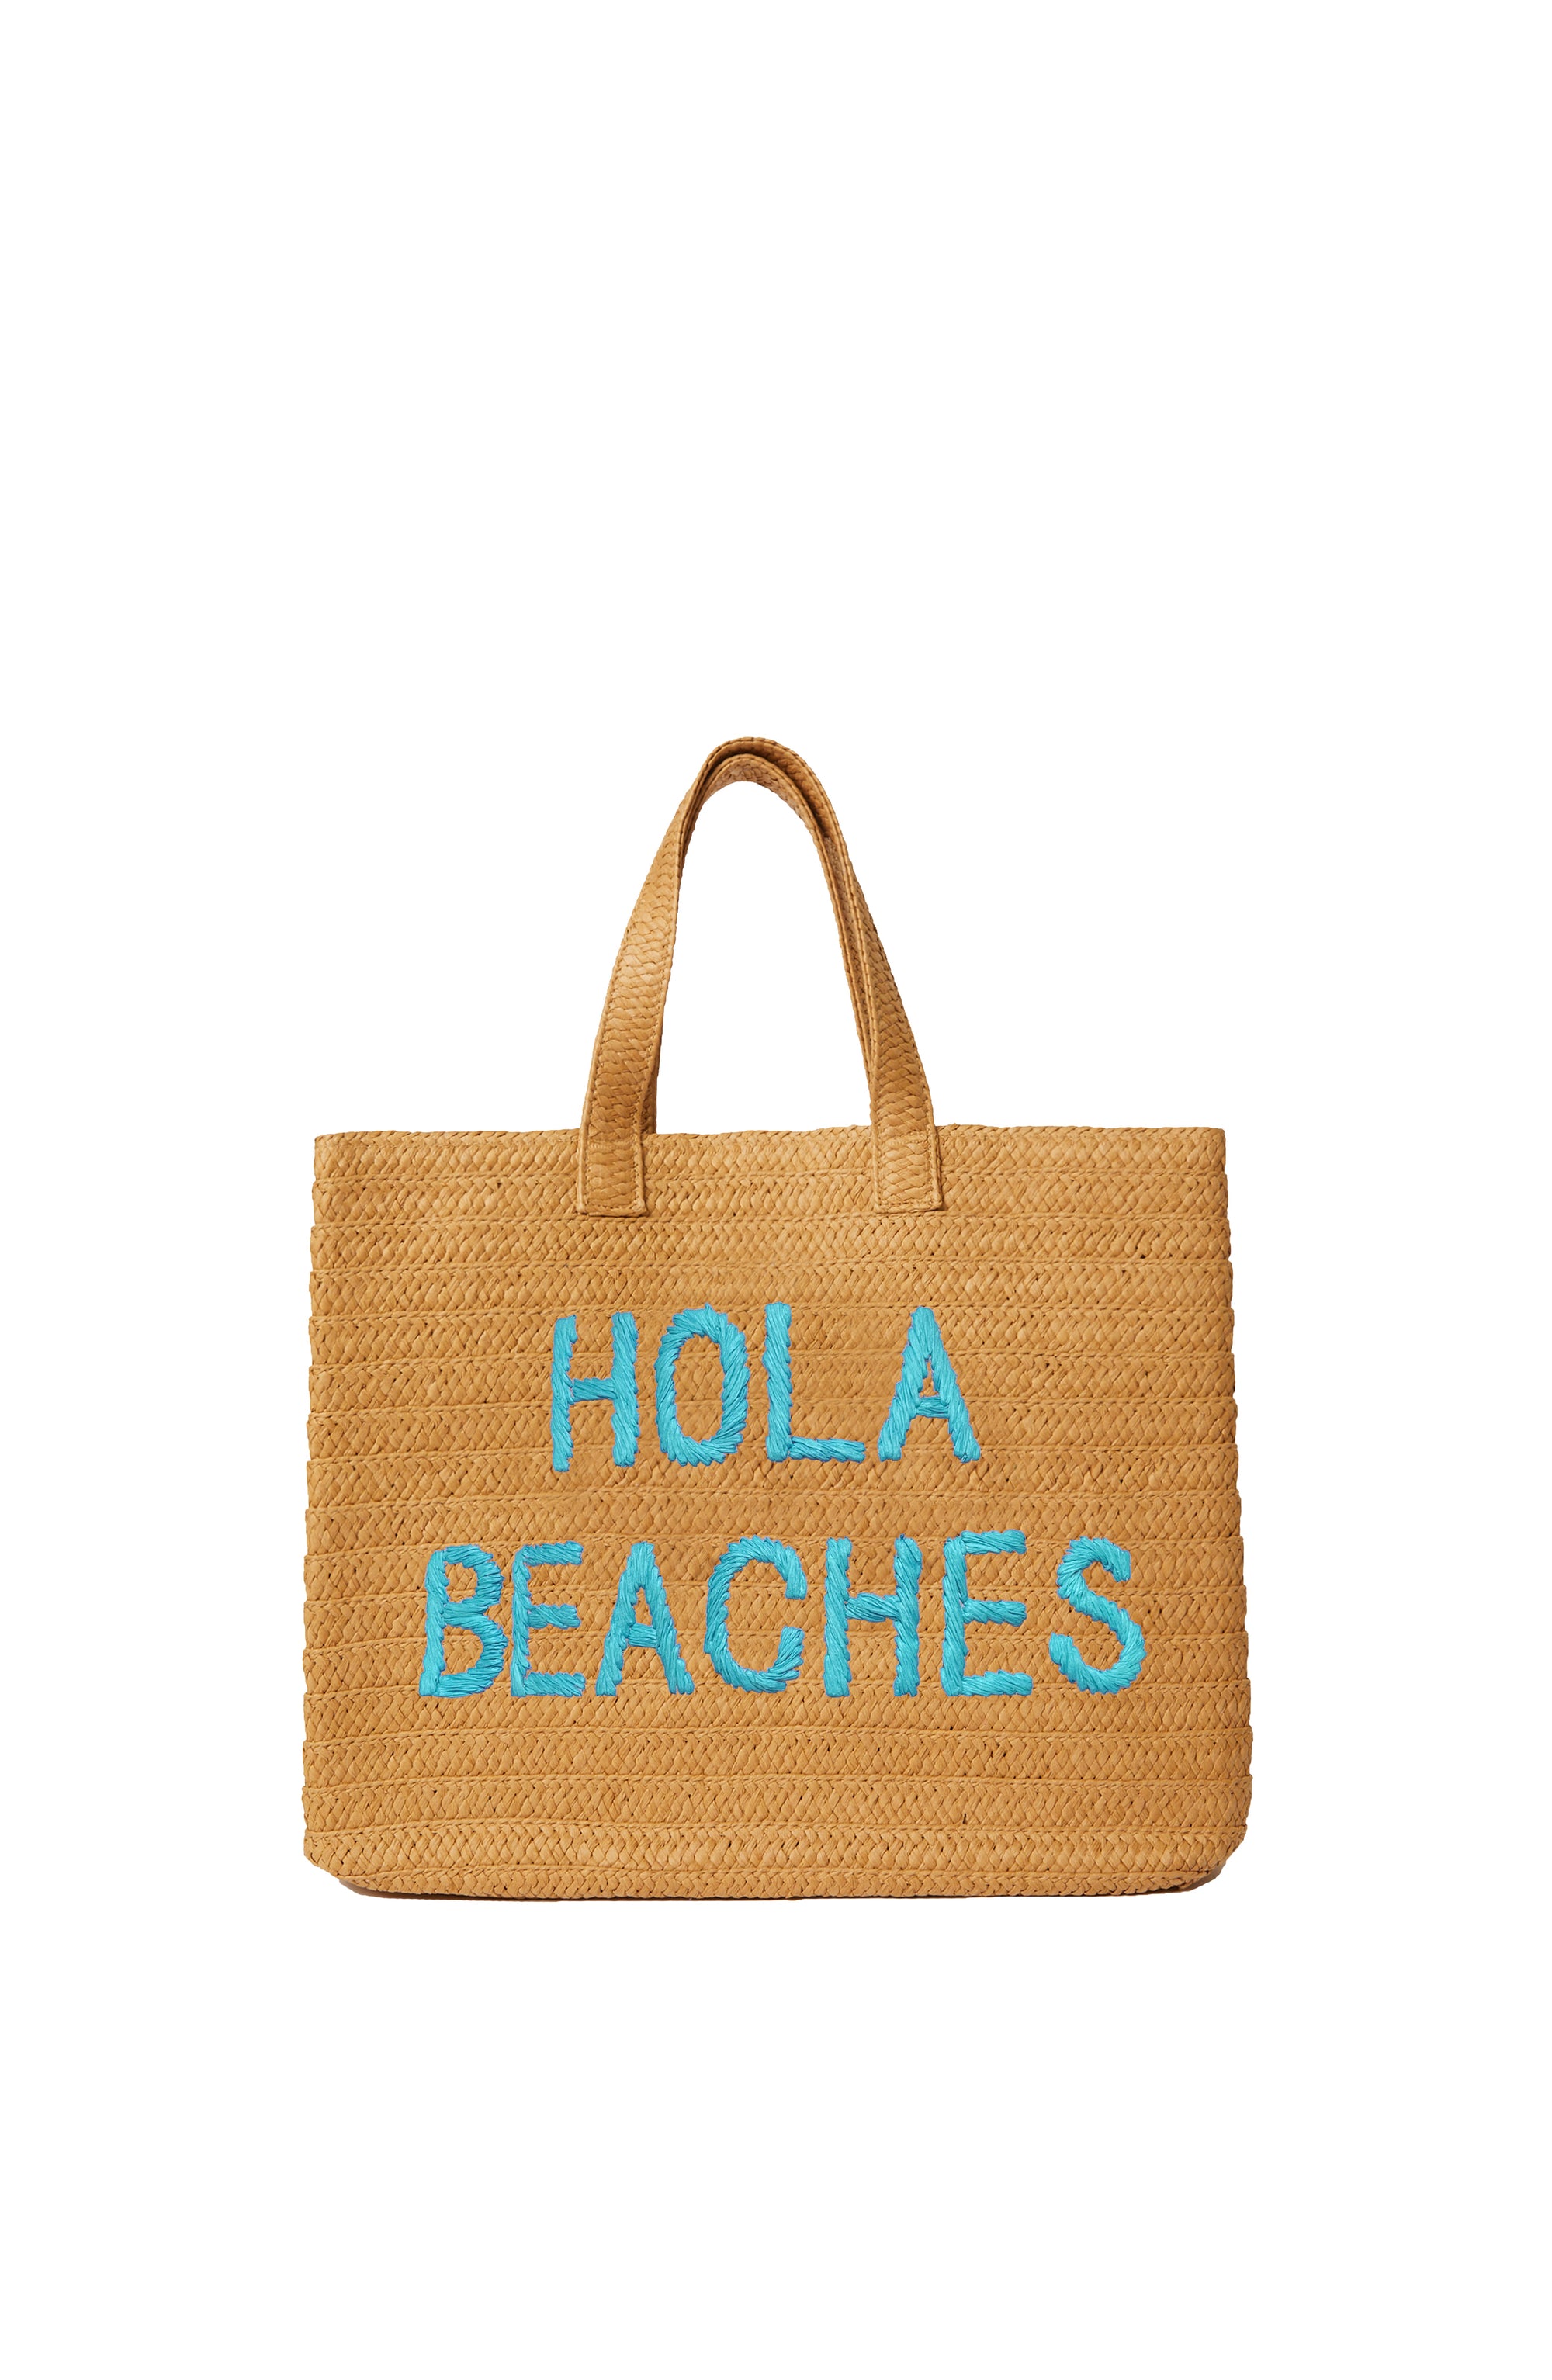 Hola Beaches Tote in Sand/Turquoise